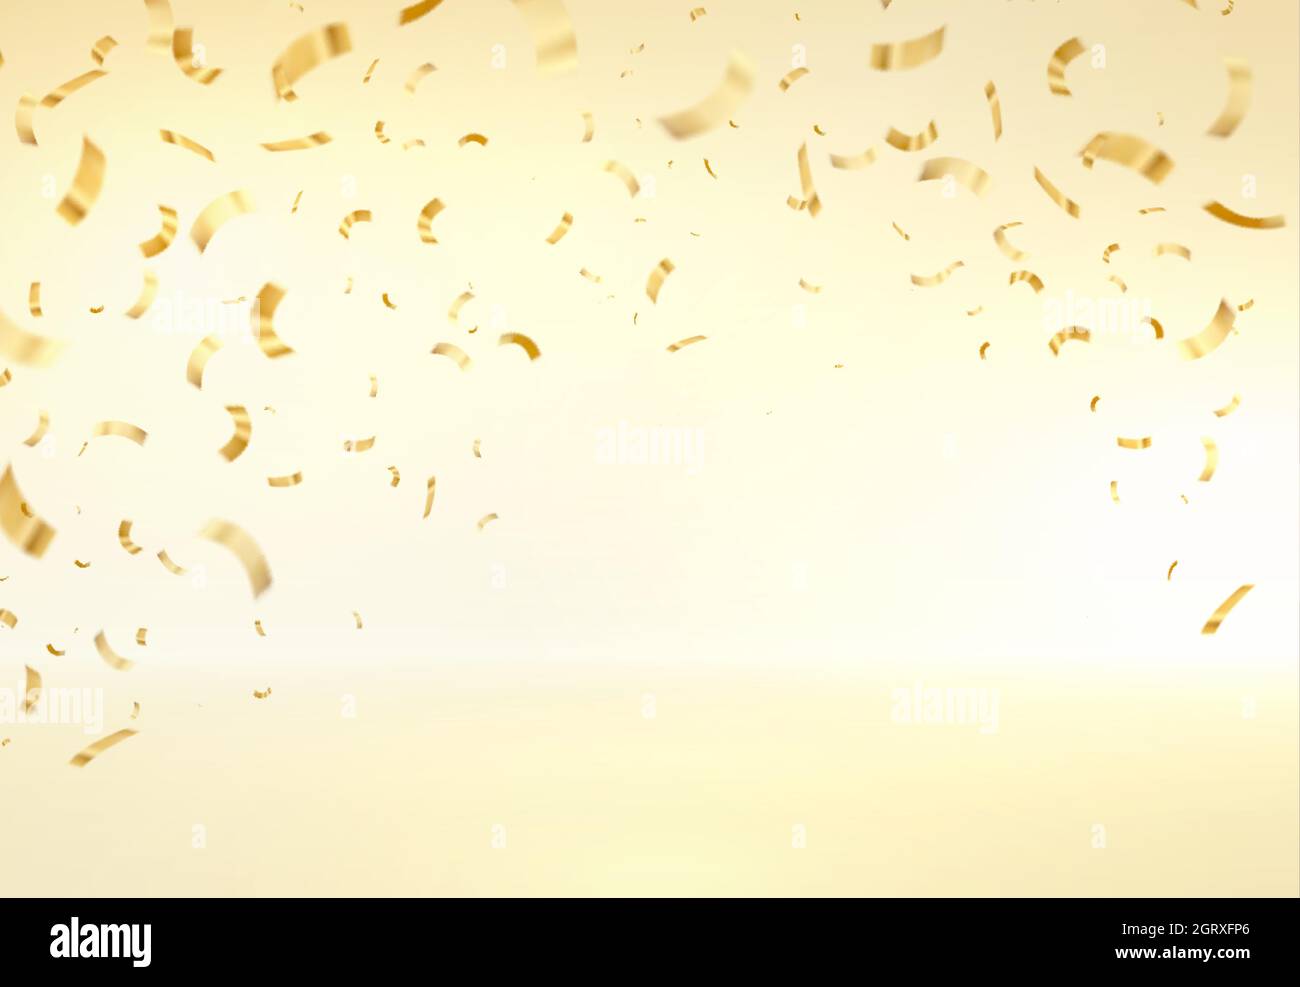 180880 Light Gold Background Illustrations  Clip Art  iStock  White  background Gold texture